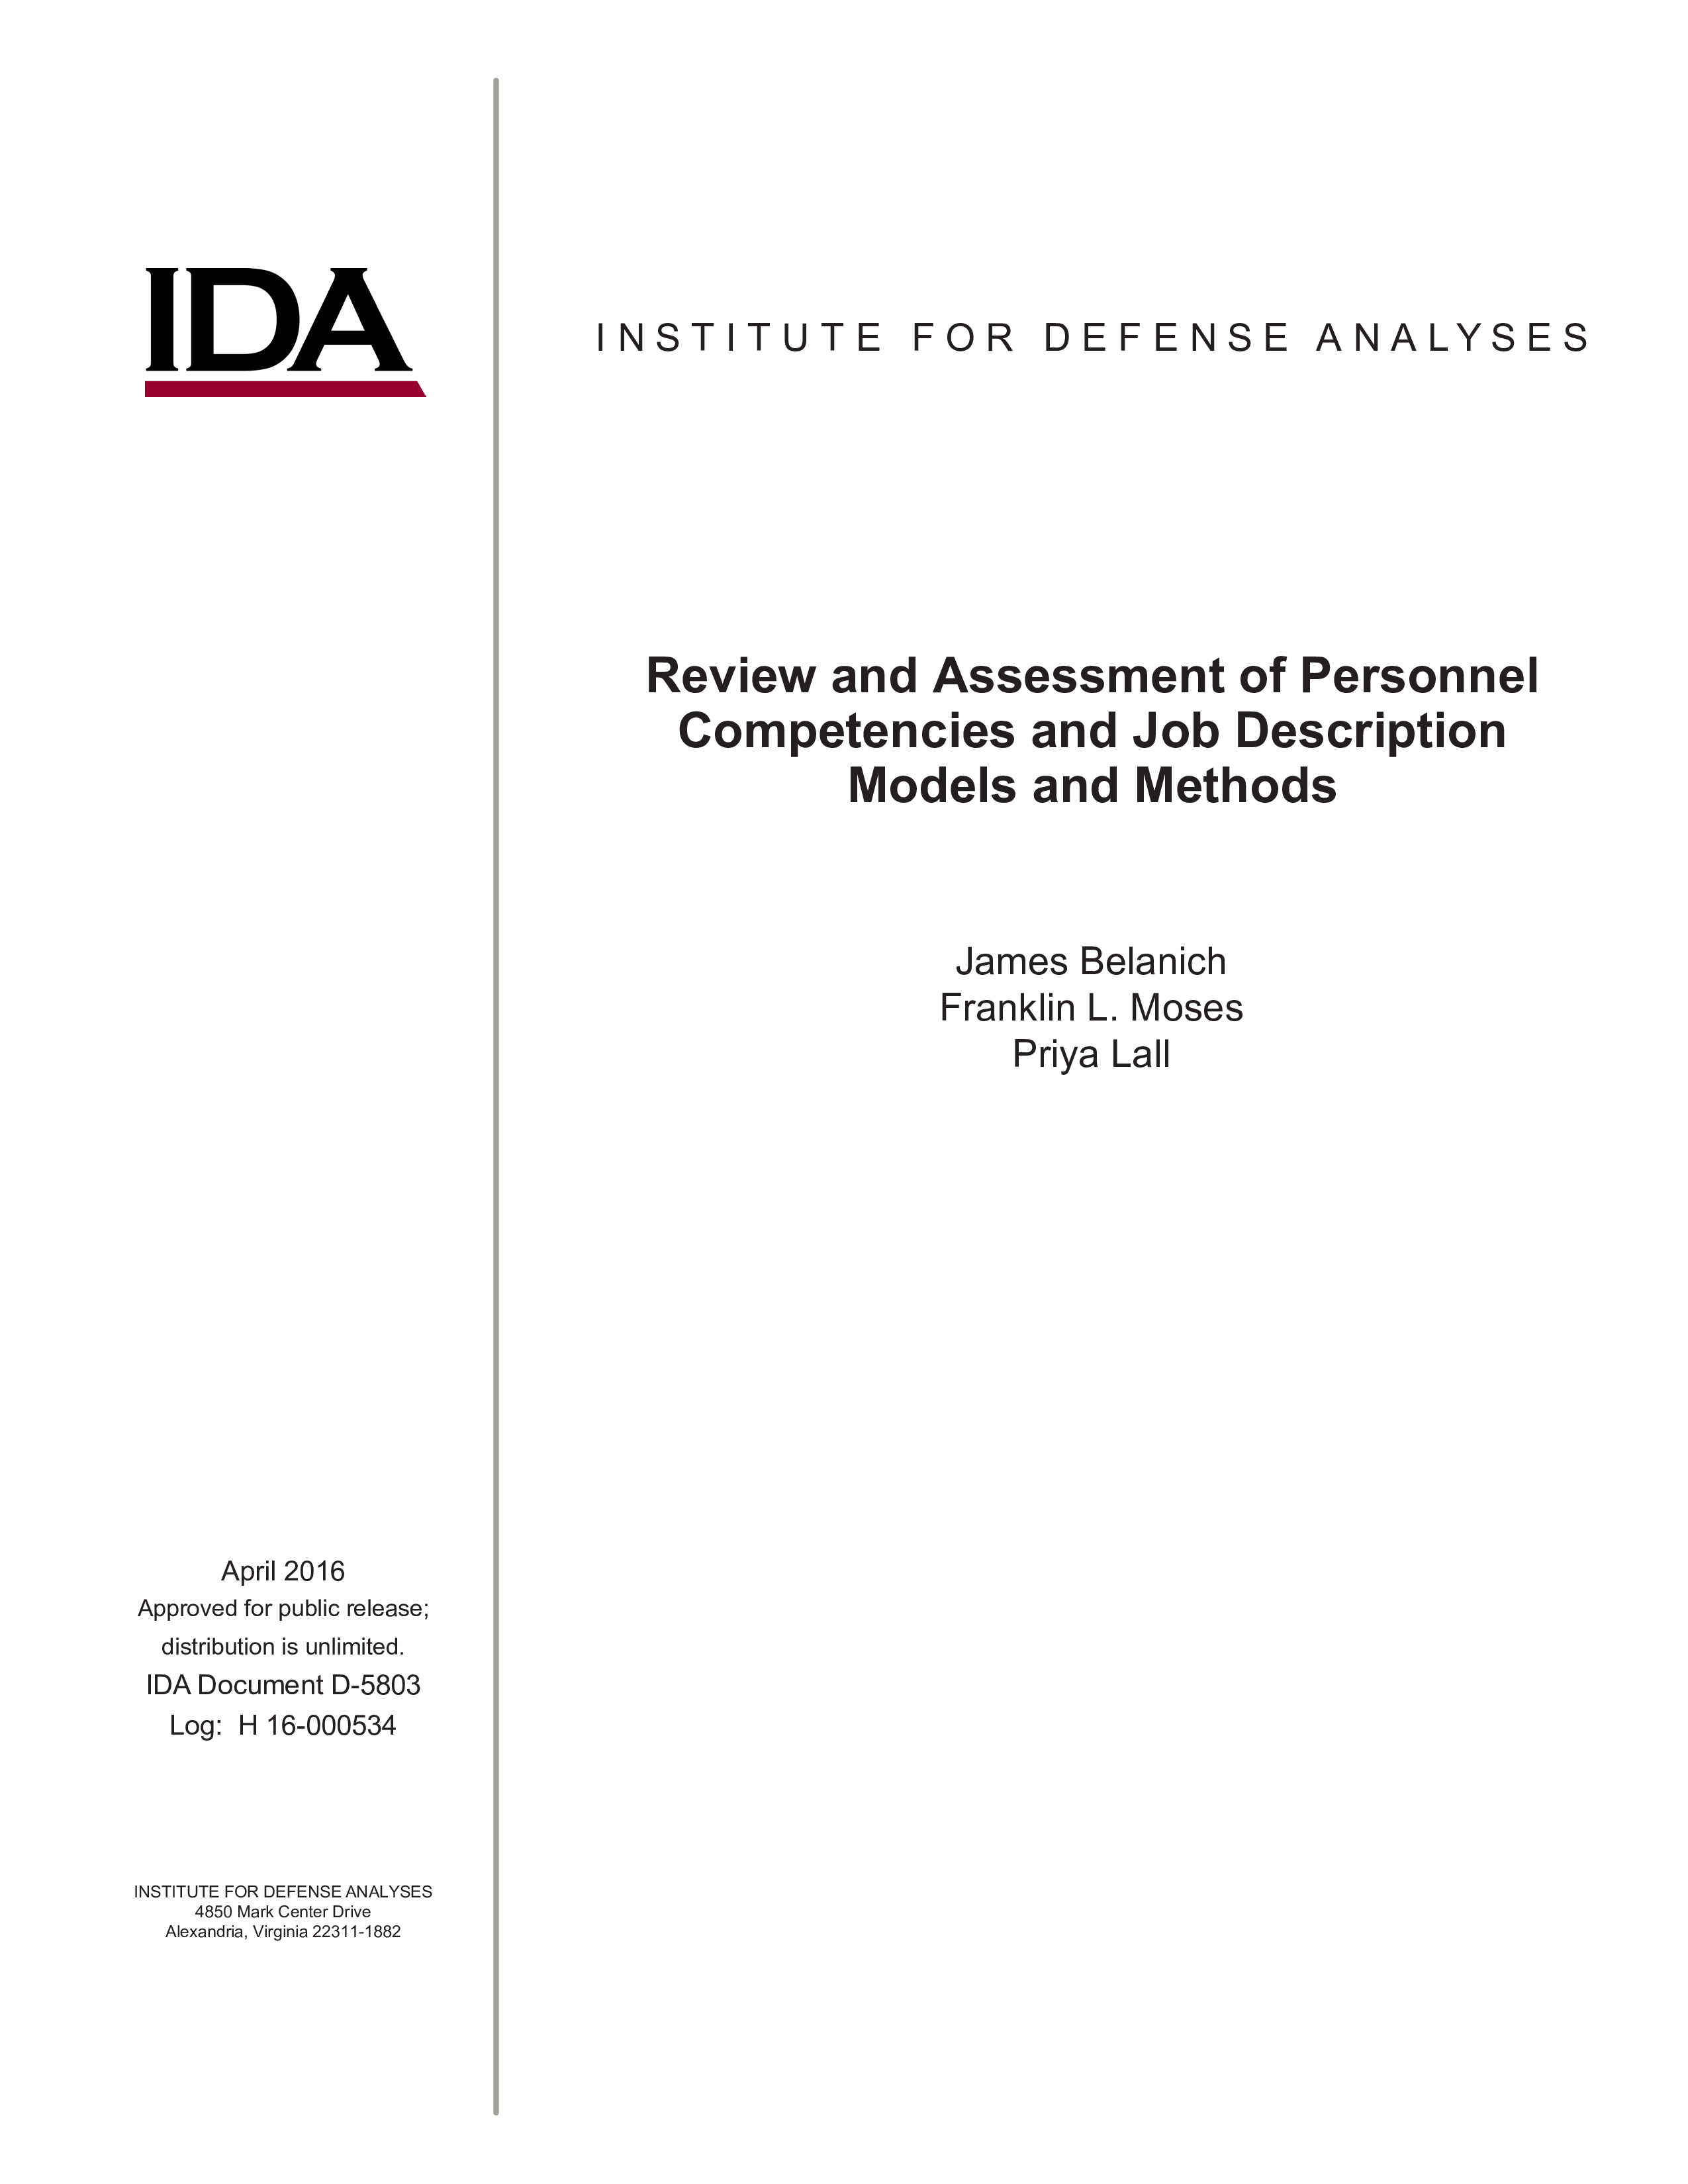 Review and Assessment of Personnel Competencies and Job Description Models and Methods